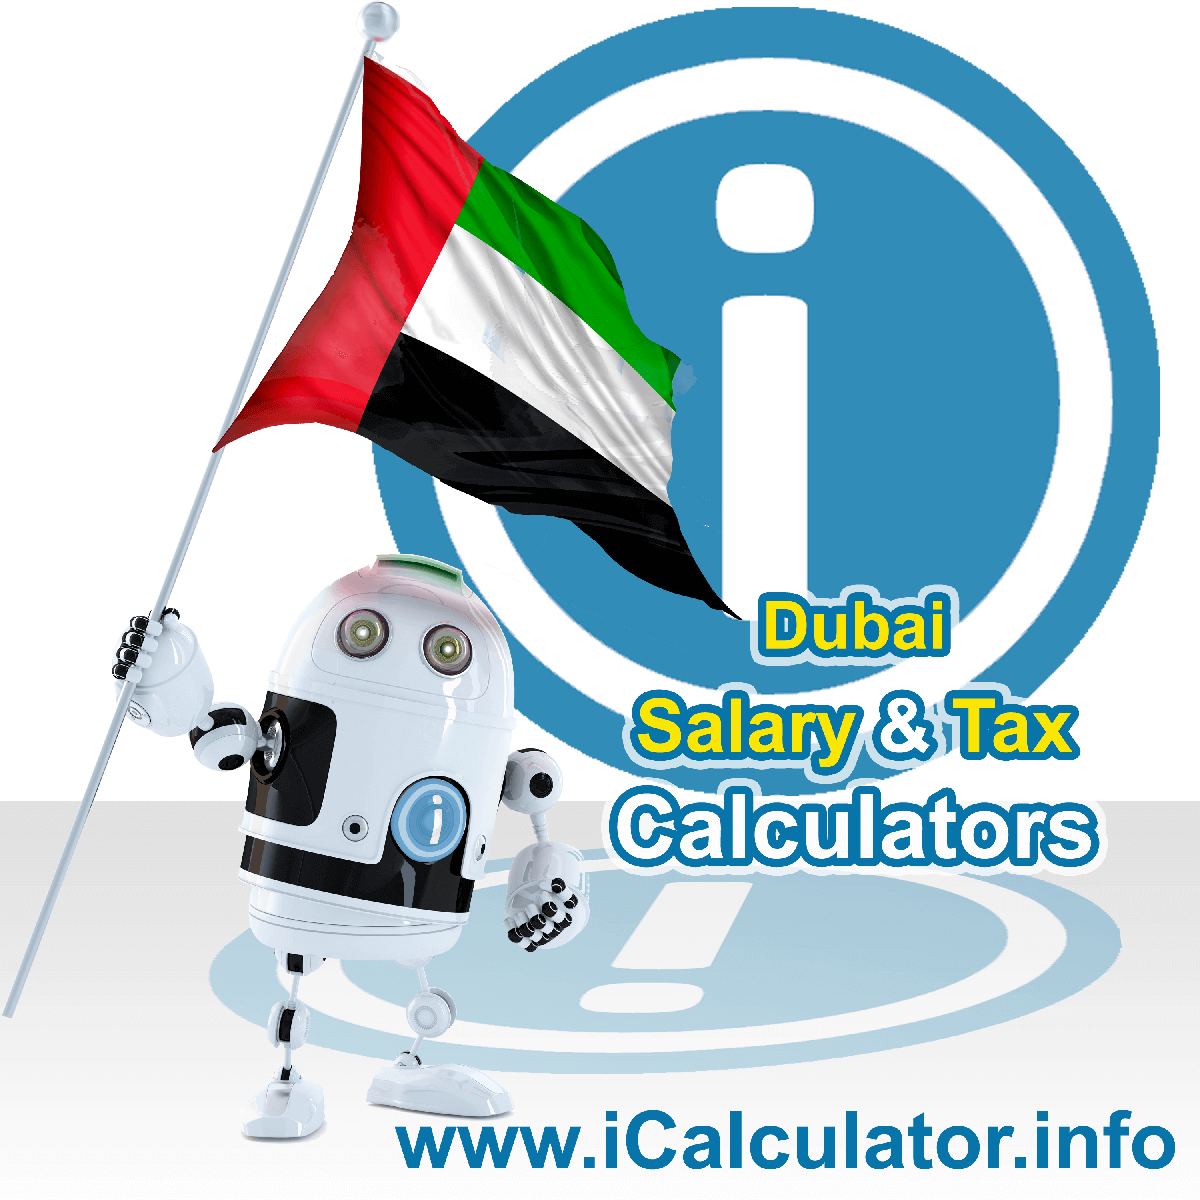 Dubai Salary Calculator. This image shows the Dubaiese flag and information relating to the tax formula for the Dubai Tax Calculator